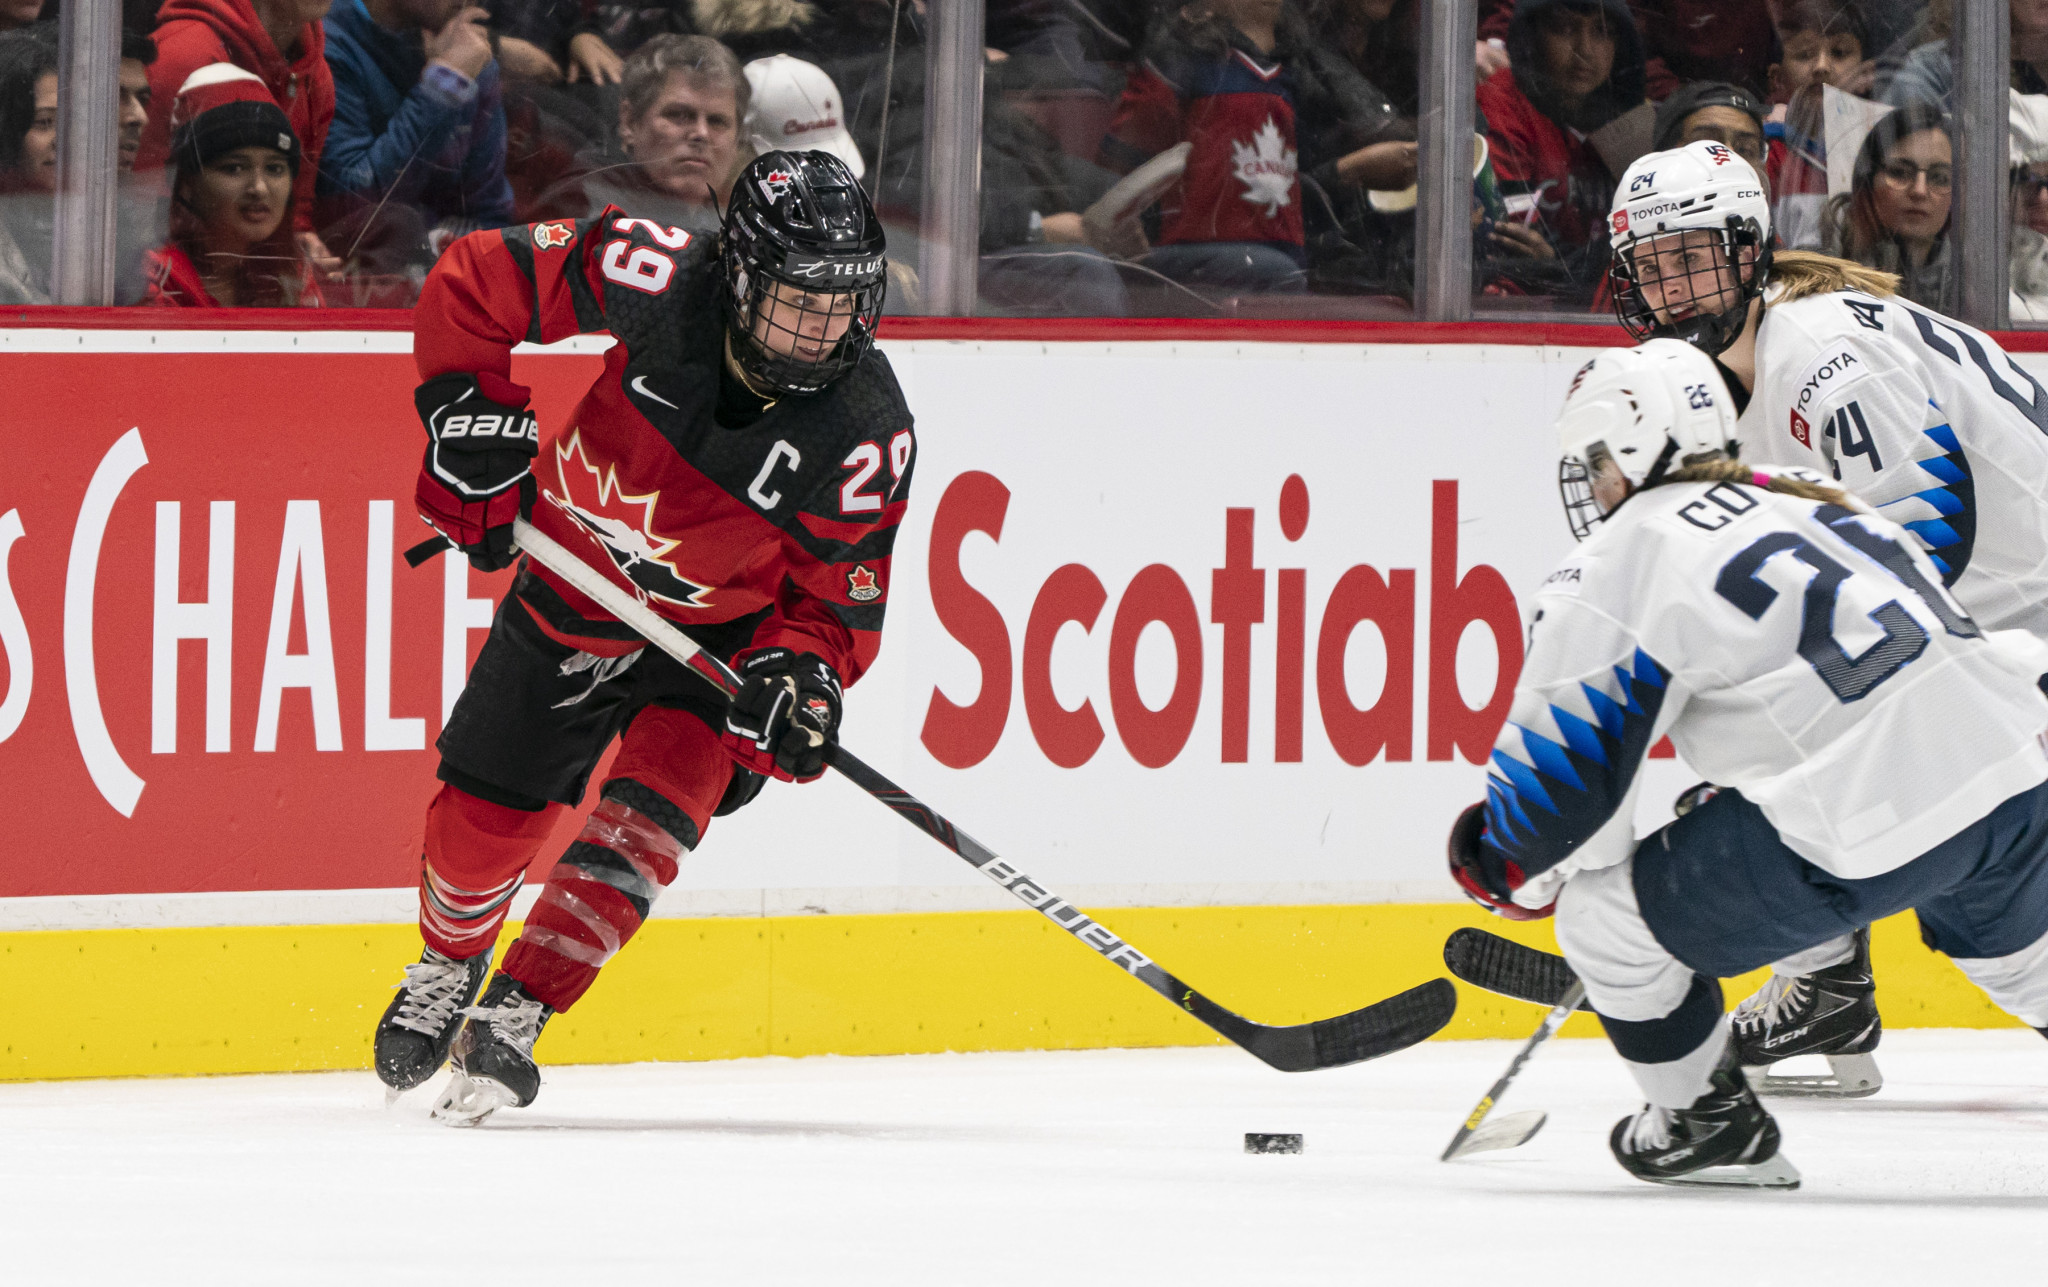 Marie-Philip Poulin will lead Canada's 25-woman team at the IIHF Women's World Championships later this month ©Getty Images